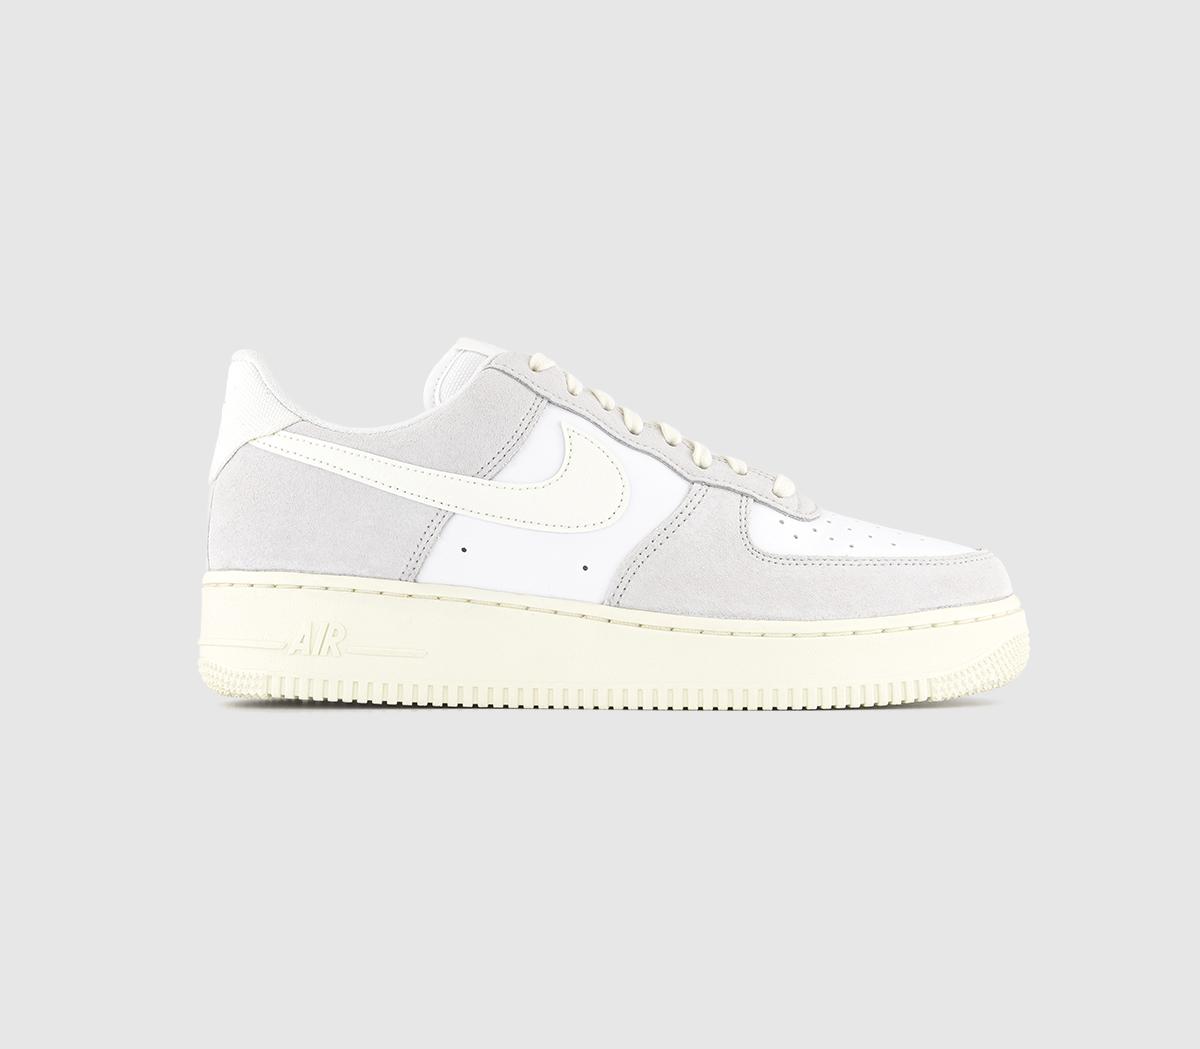 Nike Air Force 1 LV8 Trainers